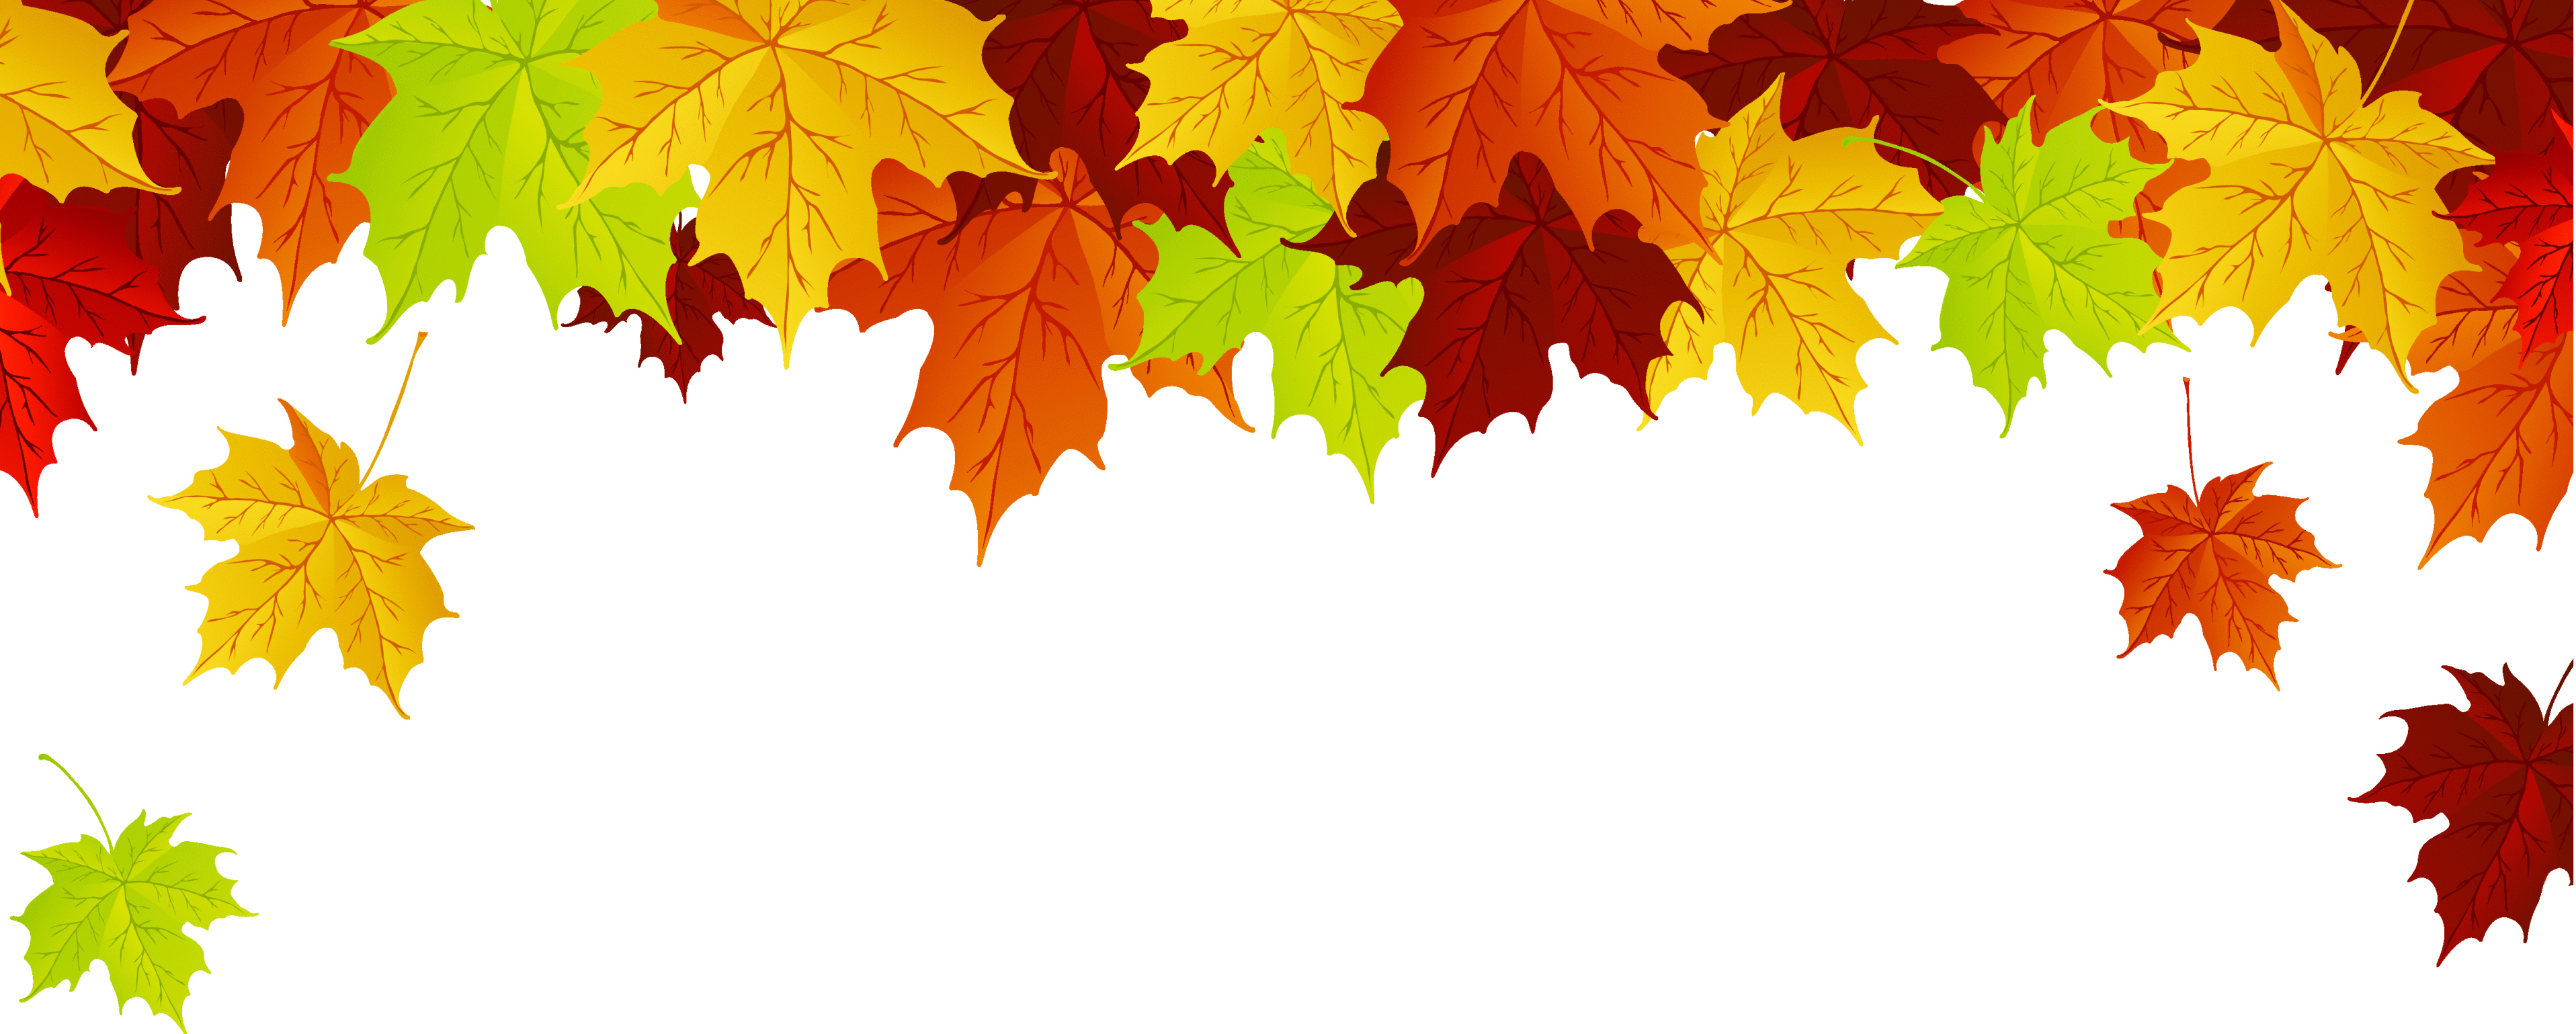 Fall Leaves Backgrounds Flowers Gallery